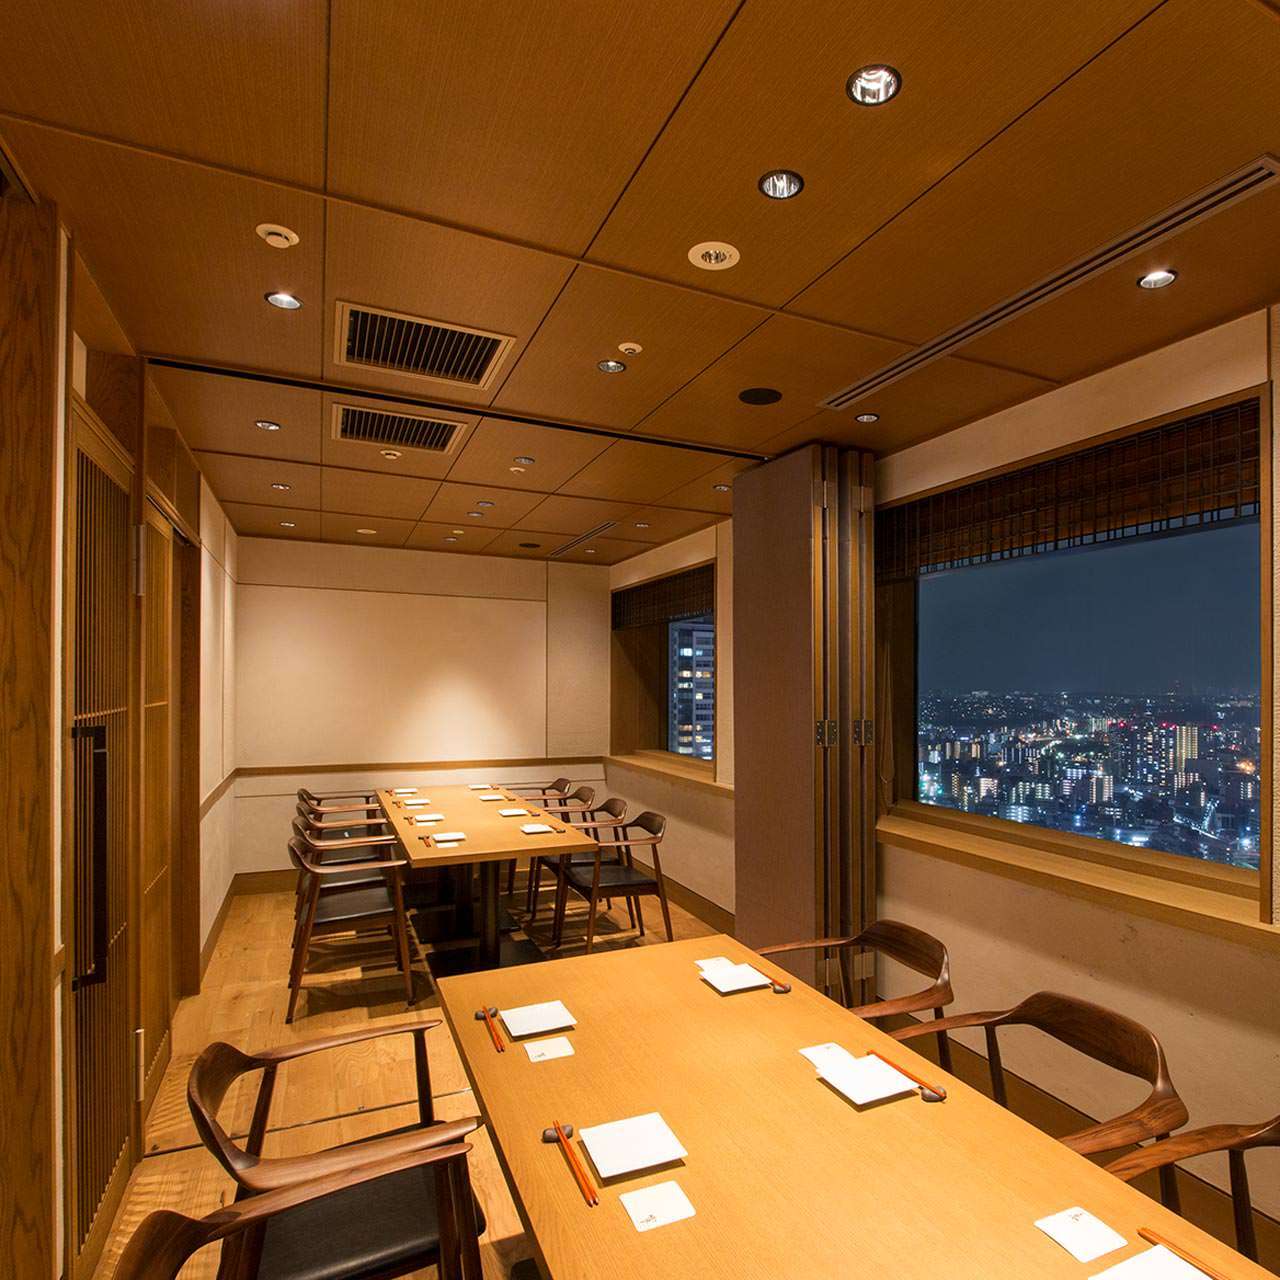 Private rooms with high-quality windows are also available for groups.